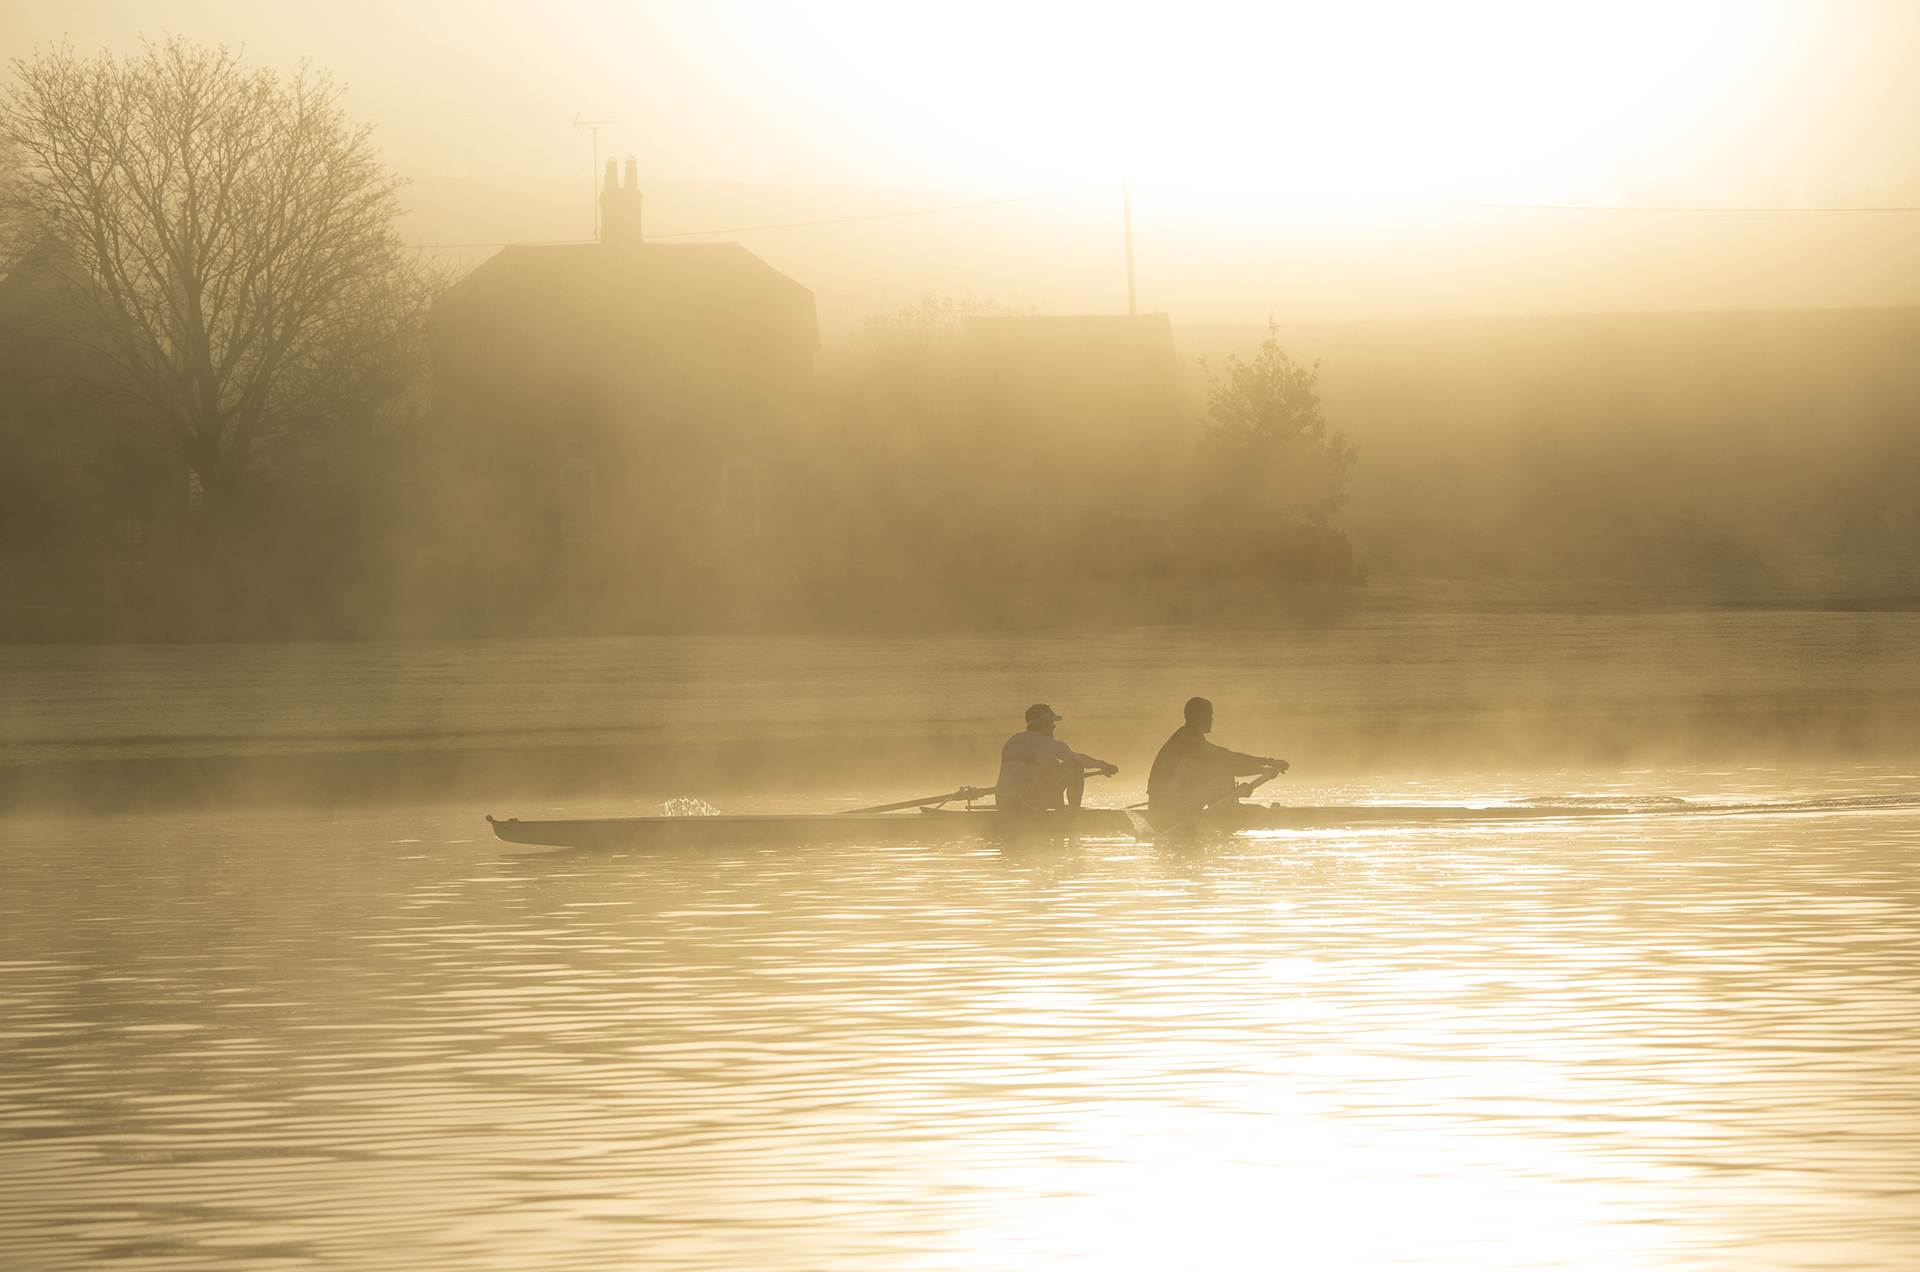 Two rowers silhouetted in the hazy early morning mists on the River Thames